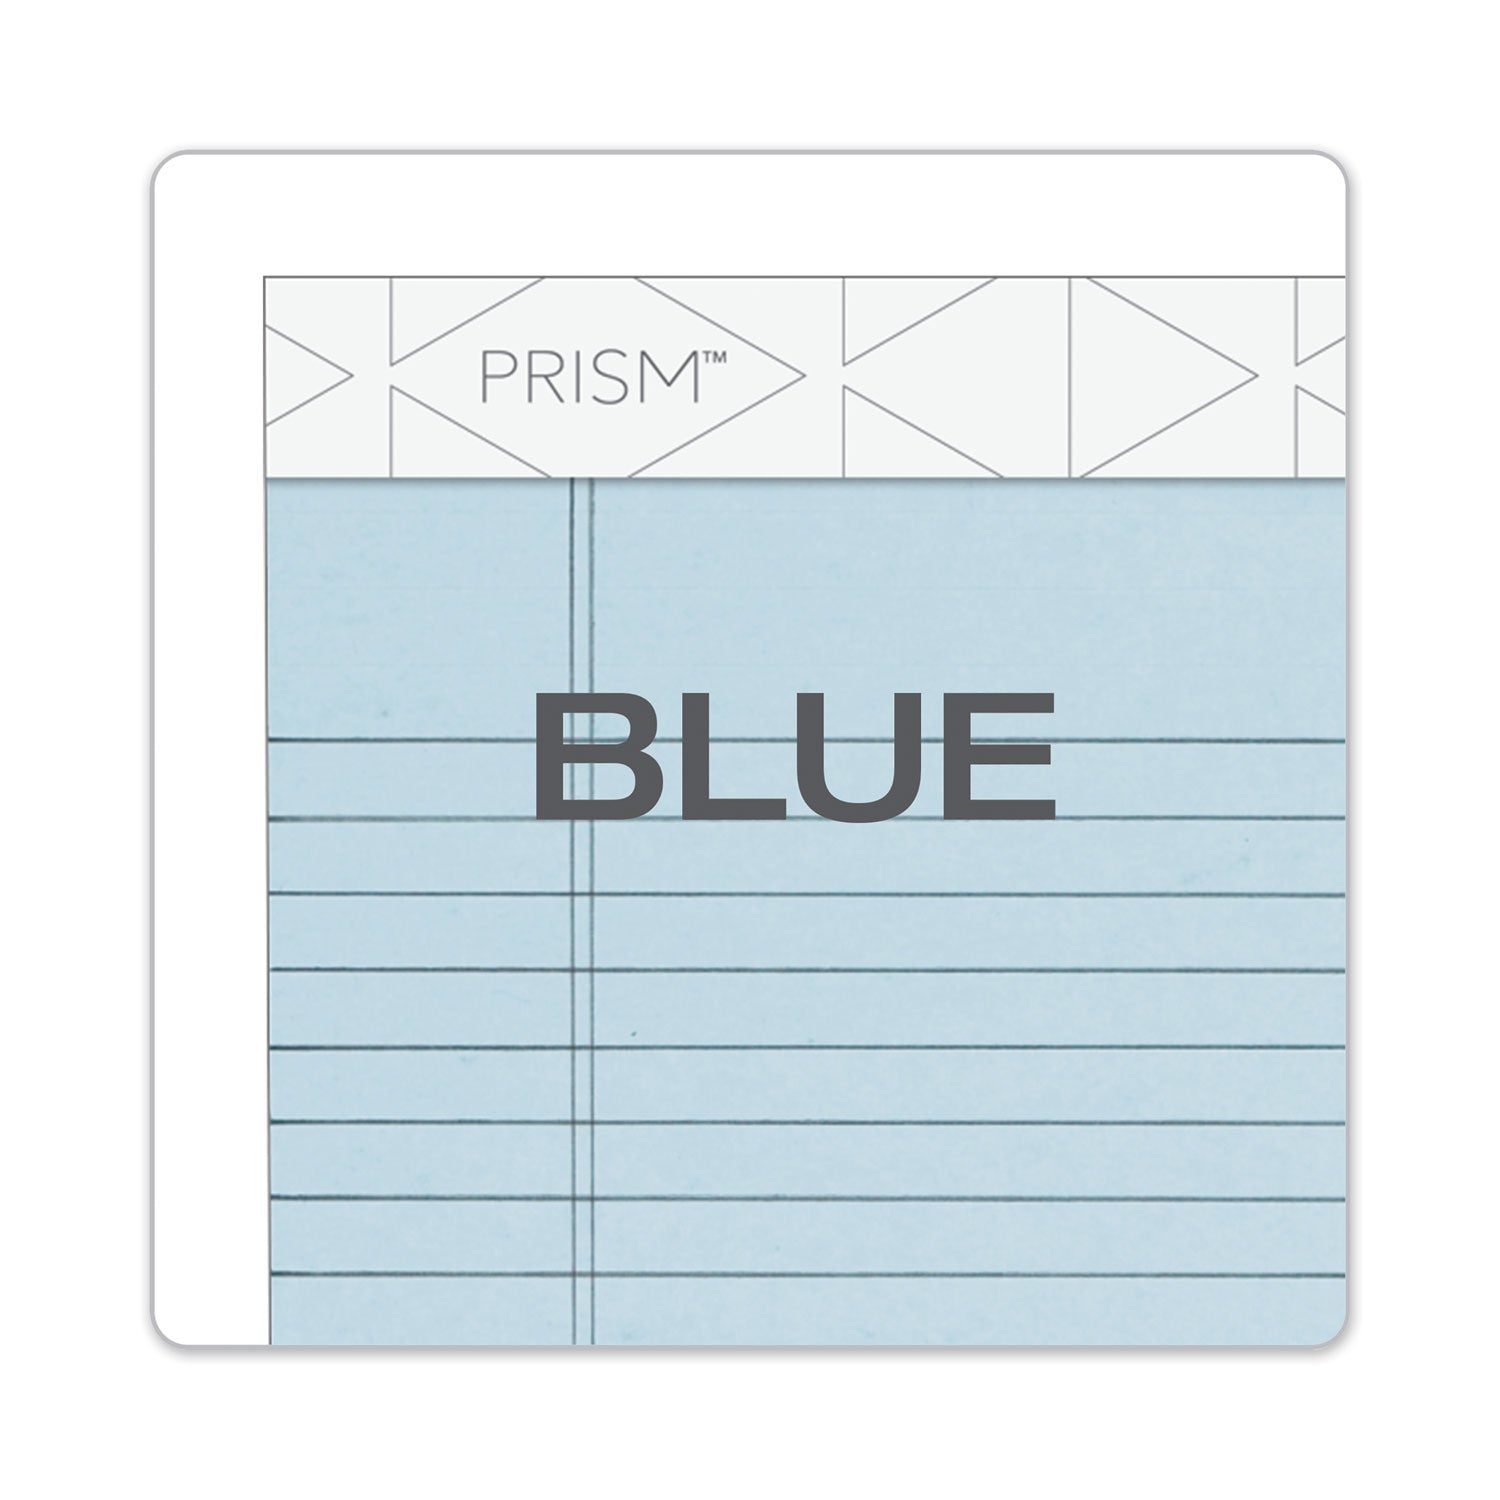 Prism + Colored Writing Pads, Narrow Rule, 50 Pastel Blue 5 x 8 Sheets, 12/Pack - 